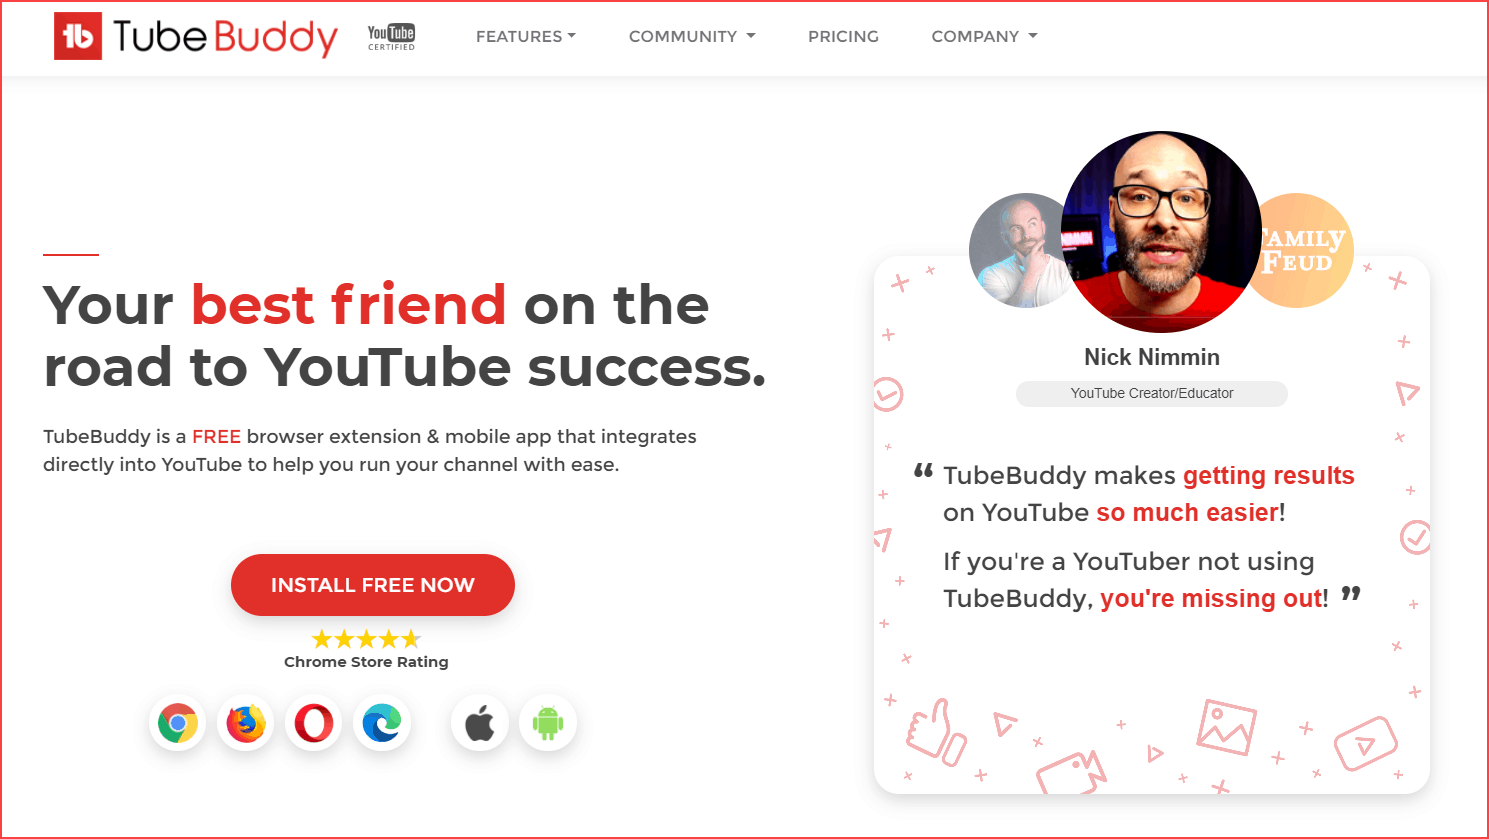 Install TubeBuddy on your browser